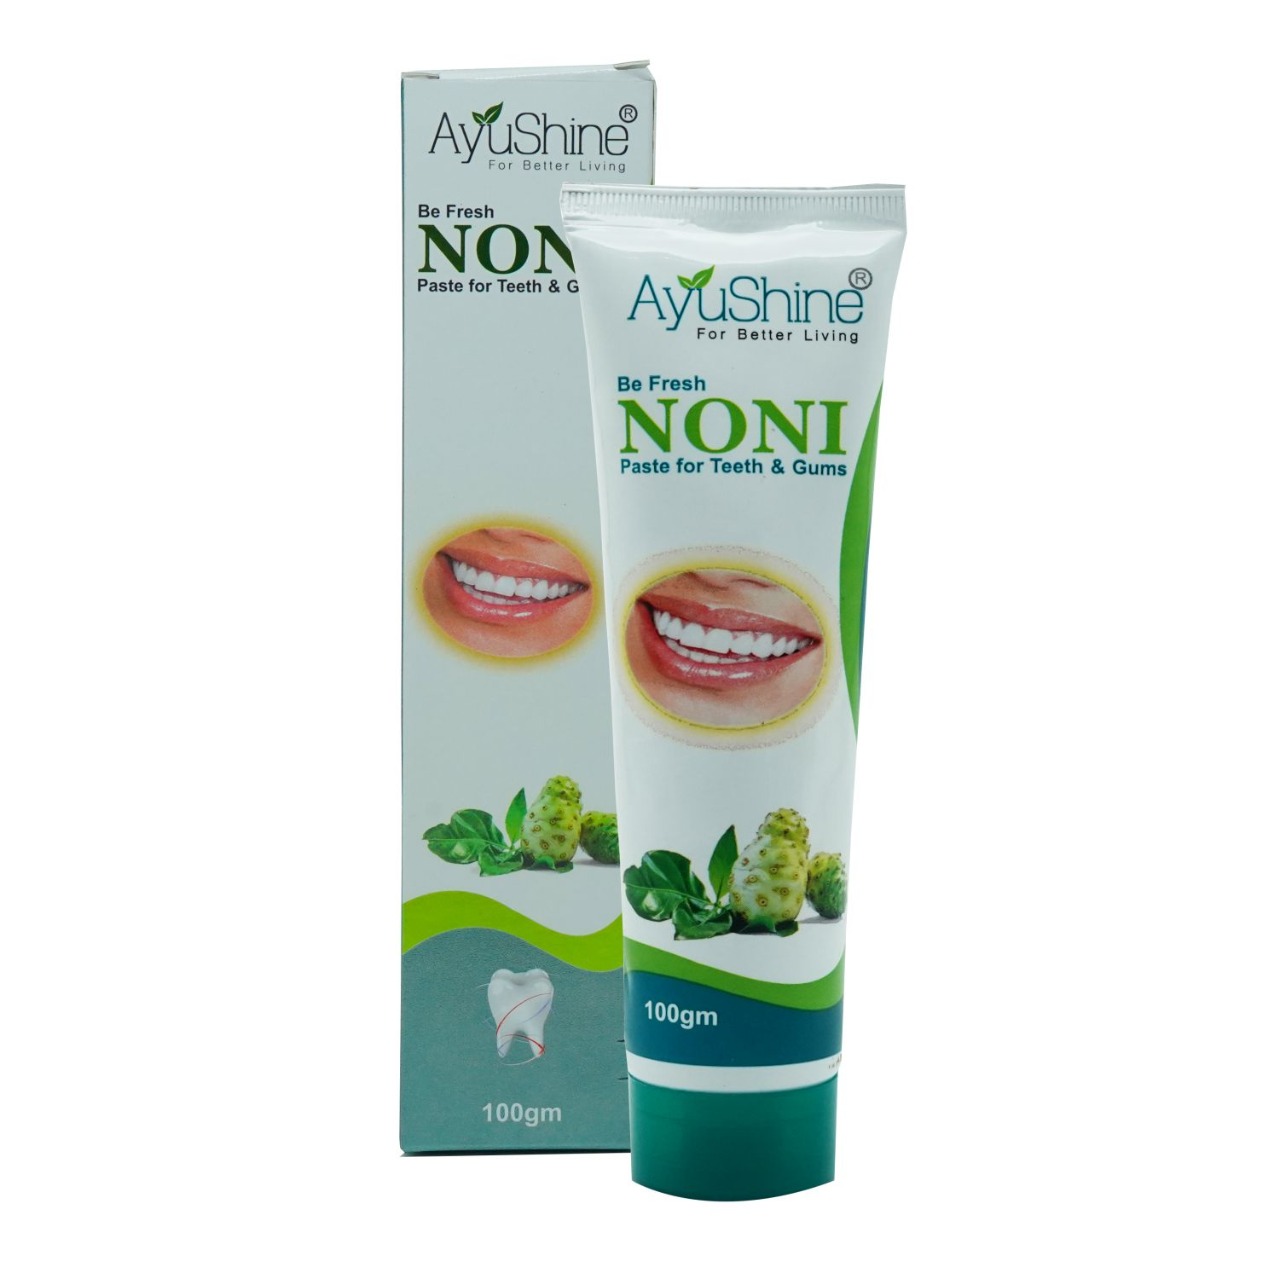 Ayushine noni paste | Complete Ayurvedic Oral Care, Pure Herbal, Natural, No Chemicals - Protect Enamels, Strengthens Gums, Reduce Plaque